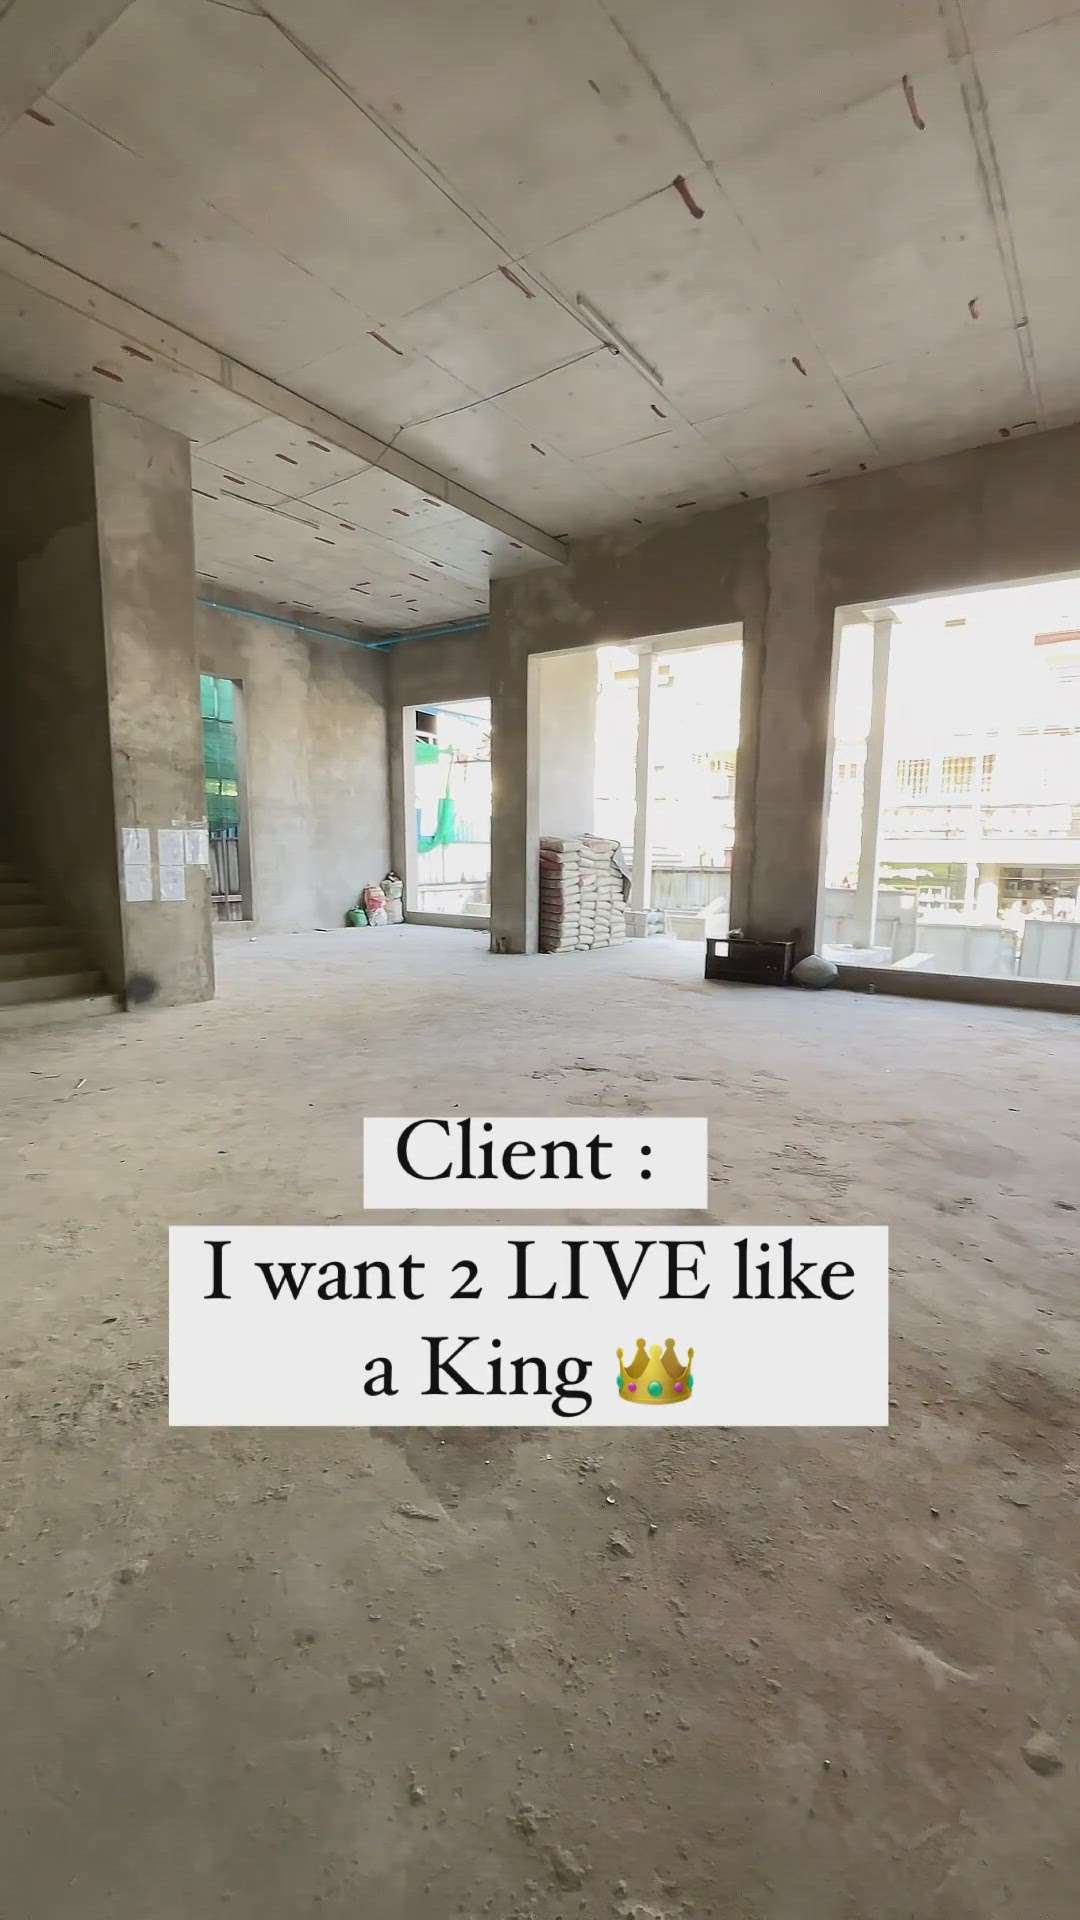 Live Like A King In The budget
-Comment Down Which One Is your Favourite.
-Like, Share With Your Friends.
-Dm For Reasonable Rates.
-For Construction And Home Designs.
-We Do Vastu Work Also.
.
.
#HouseRenovation #HouseDesigns #InteriorDesigner #interiordesign  #furniture